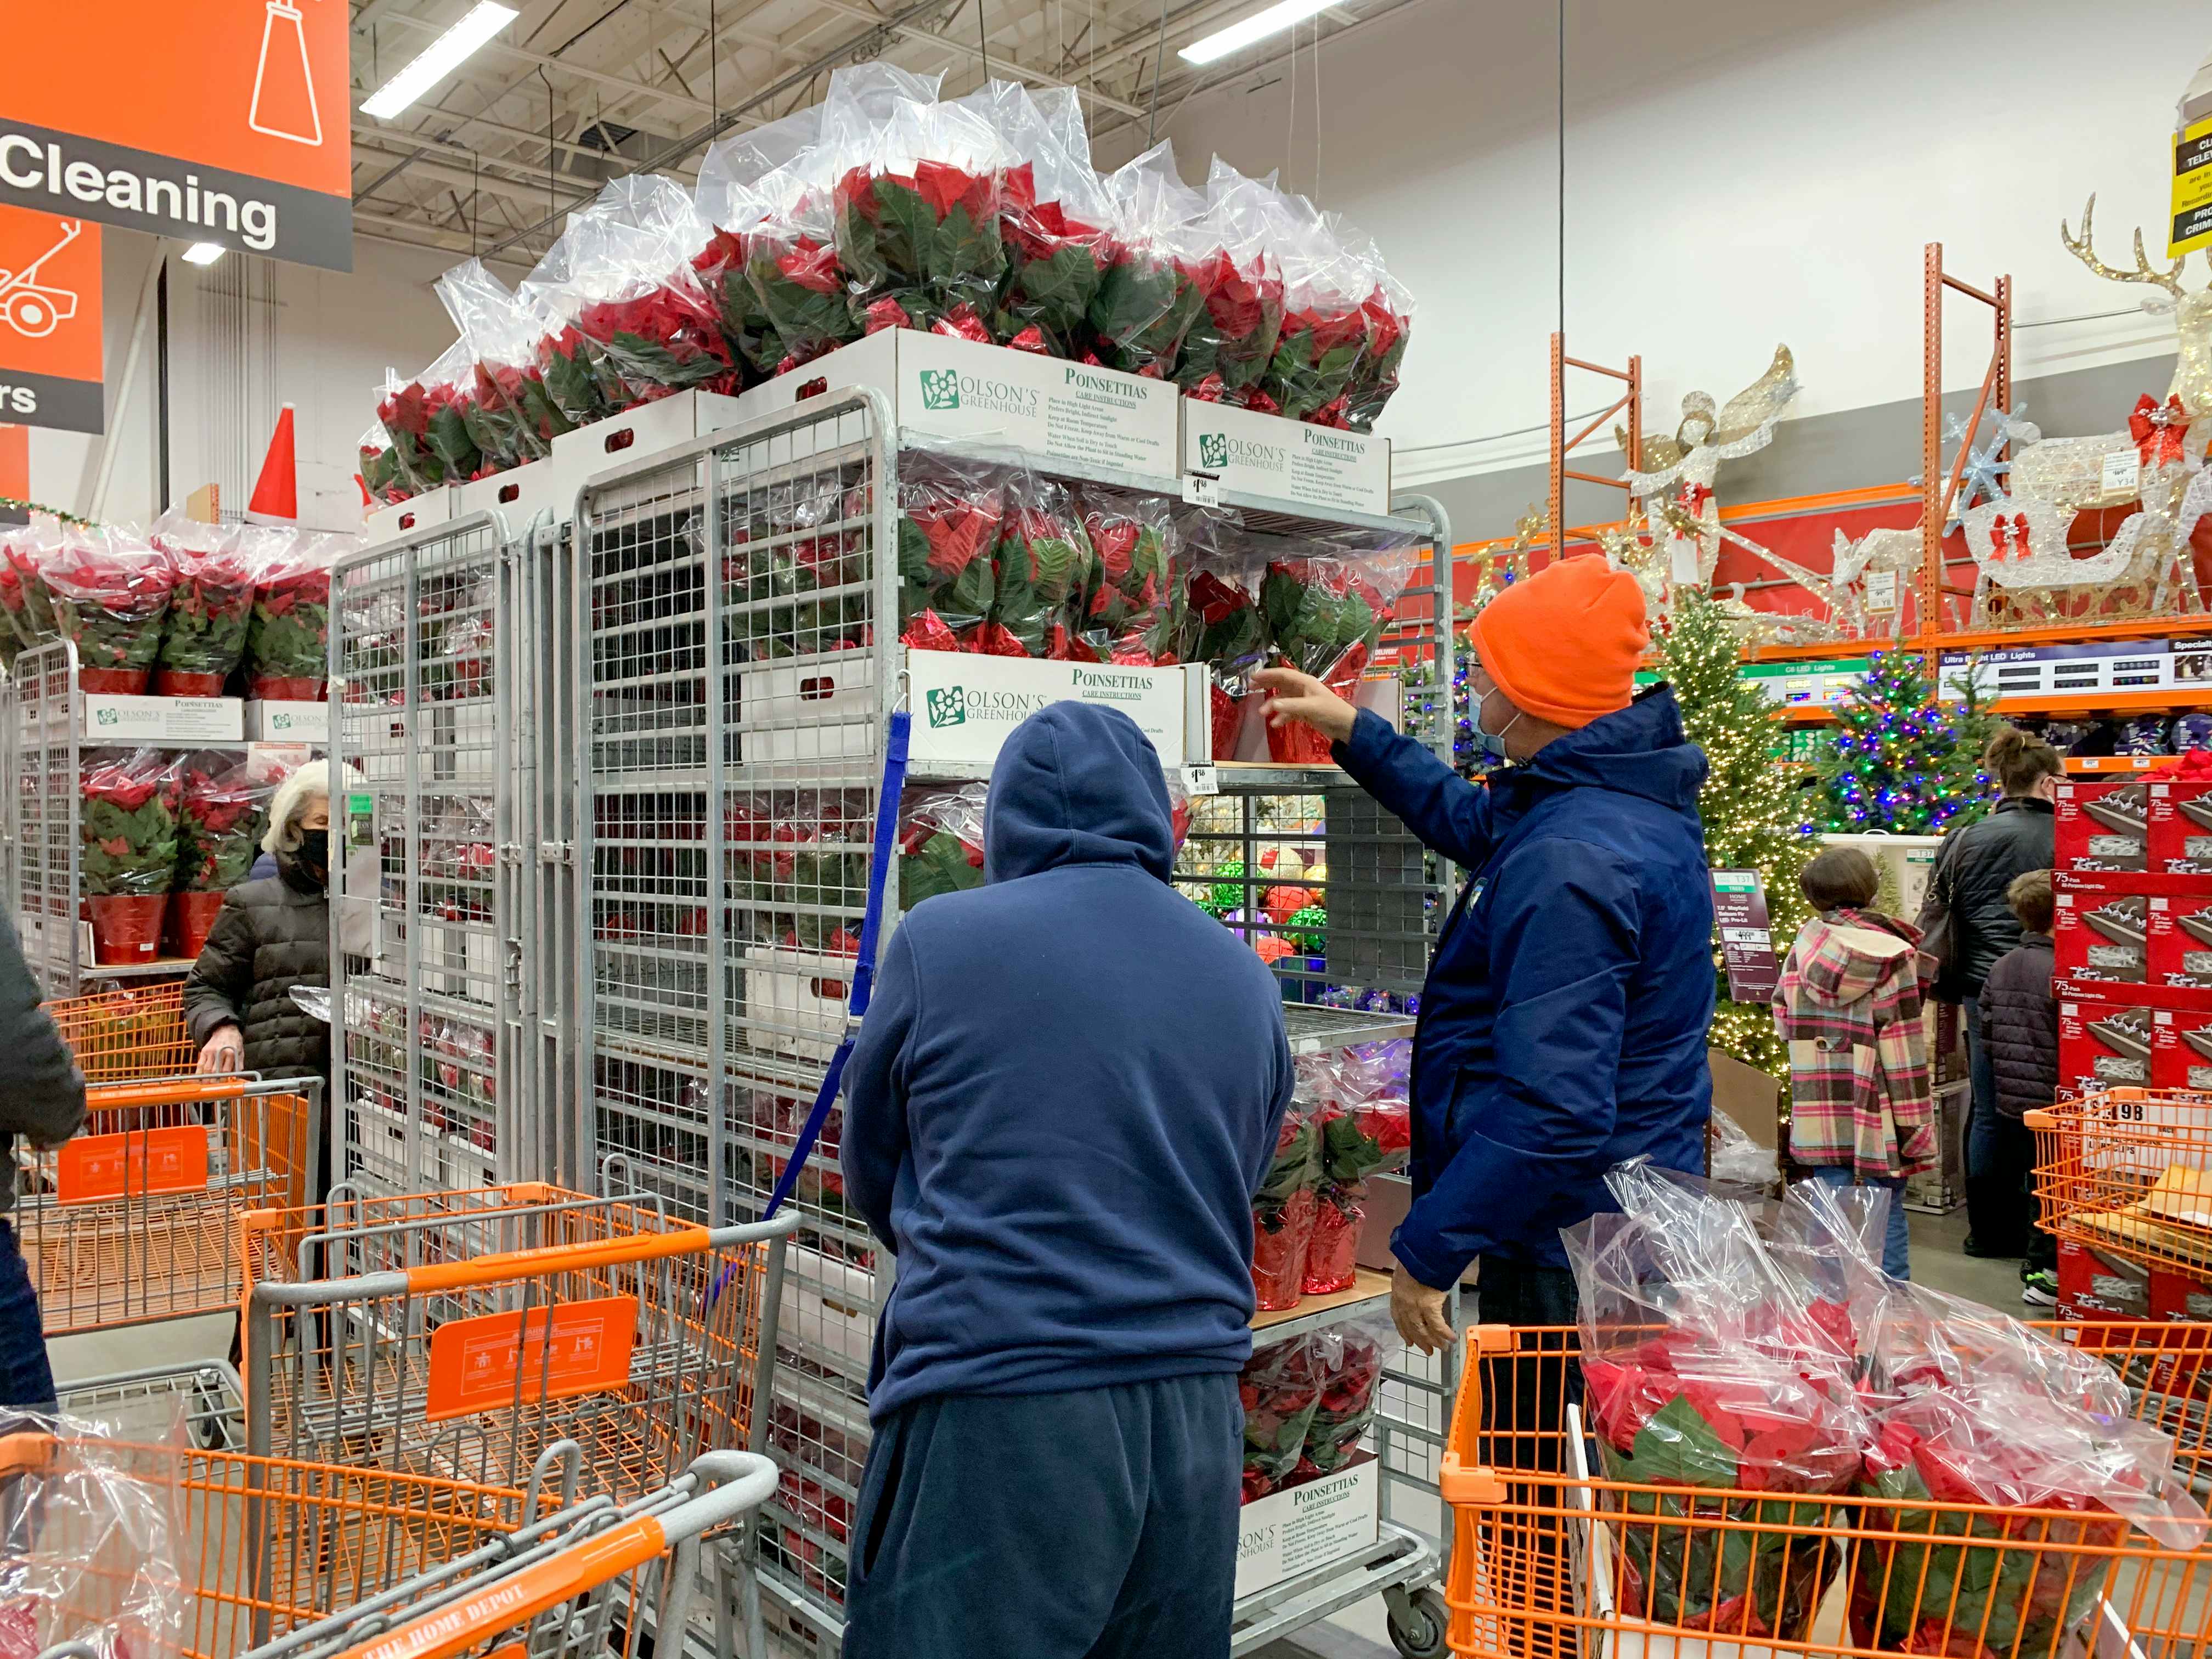 People shopping for Poinsettias at the Home Depot black Friday sale.